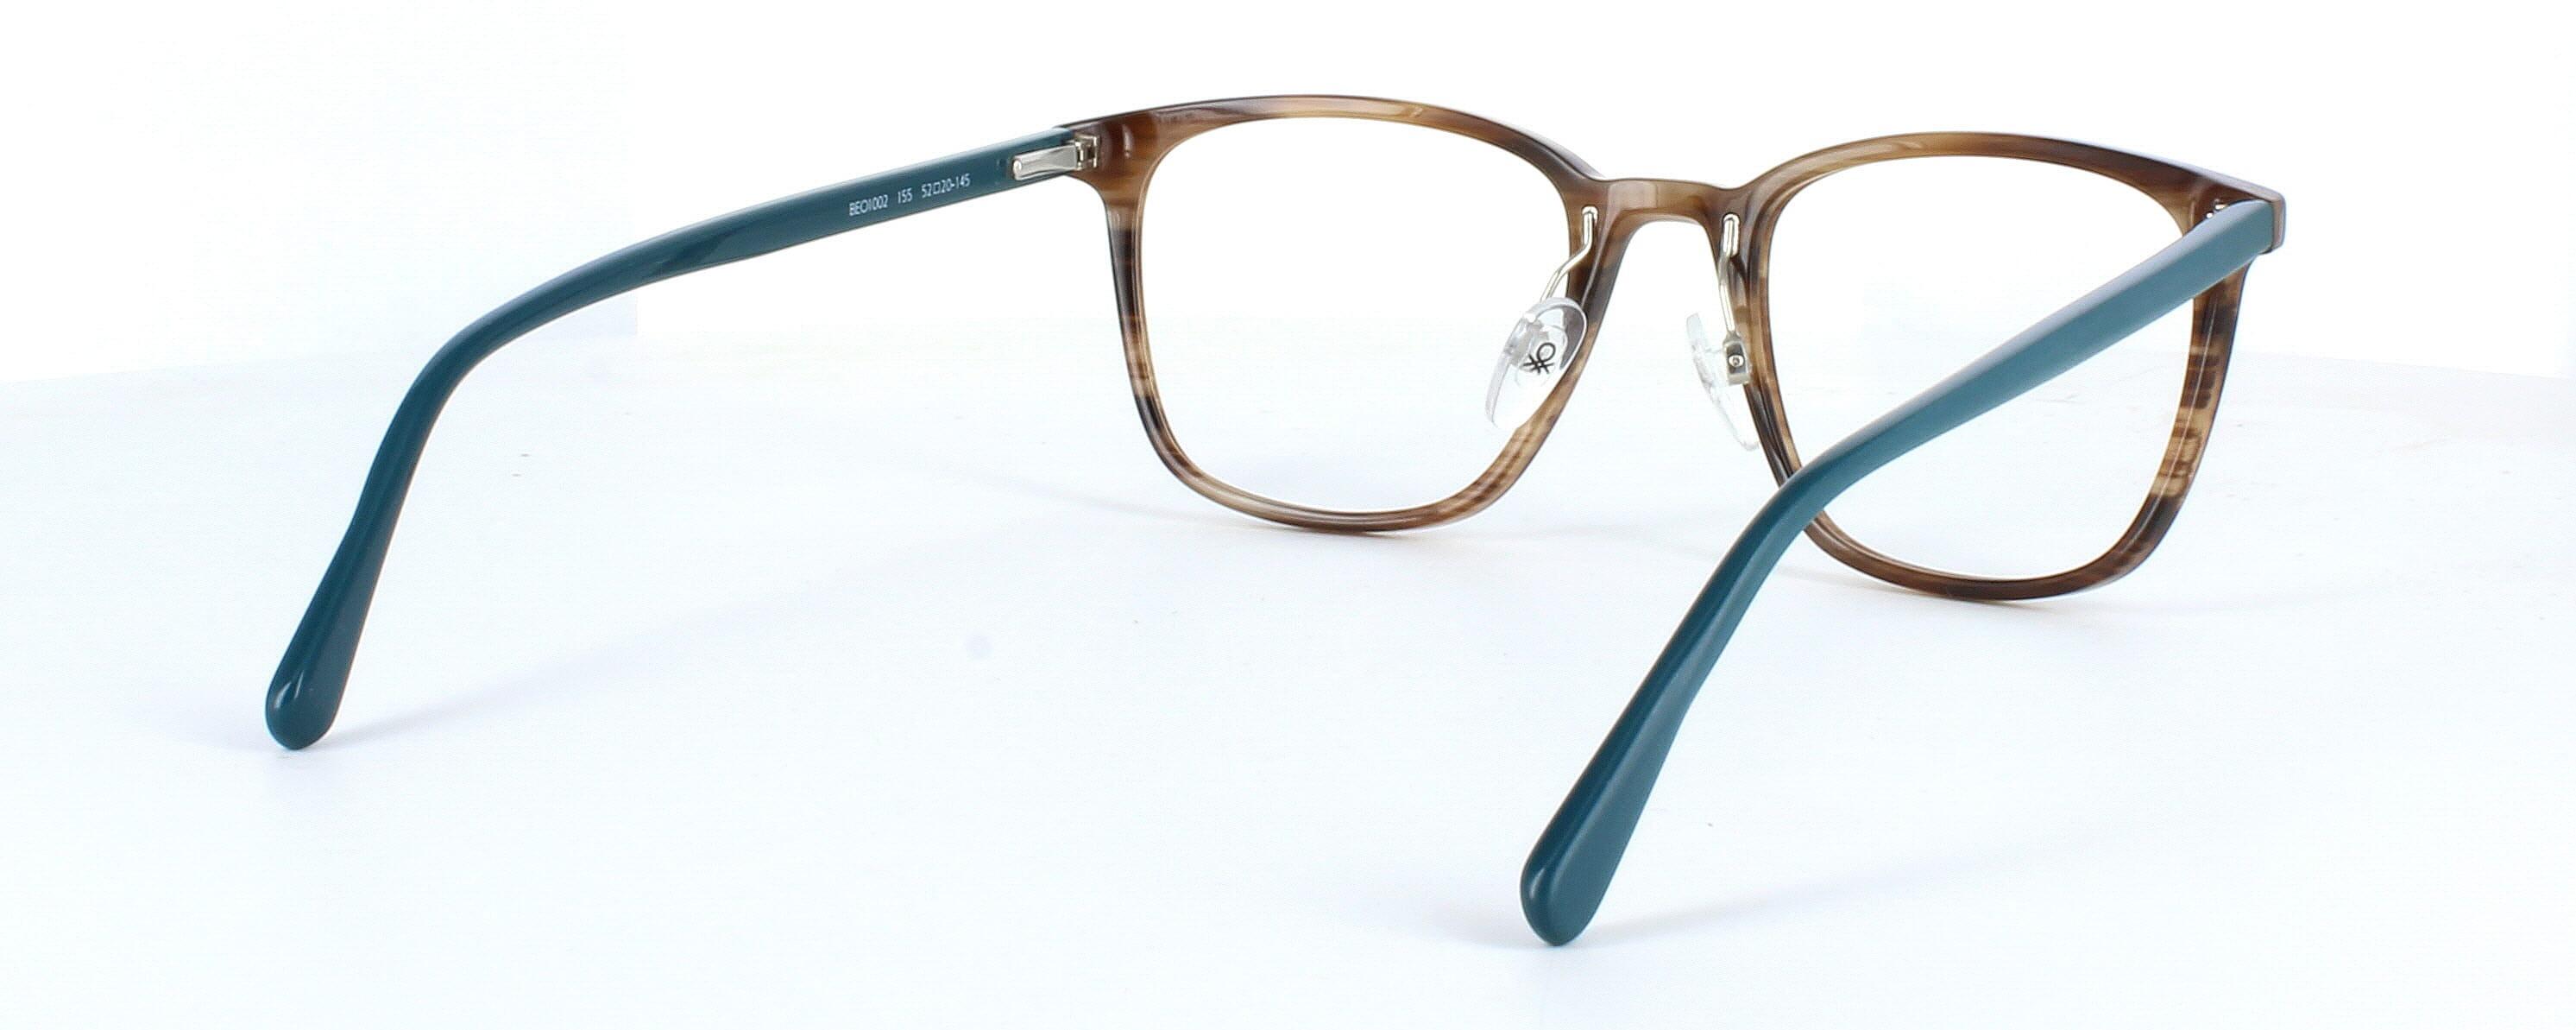 Benetton BEO1002 155 - Unisex hand made acetate glasses with tortoise face and matt turquoise sprung hinged arms - image view 4